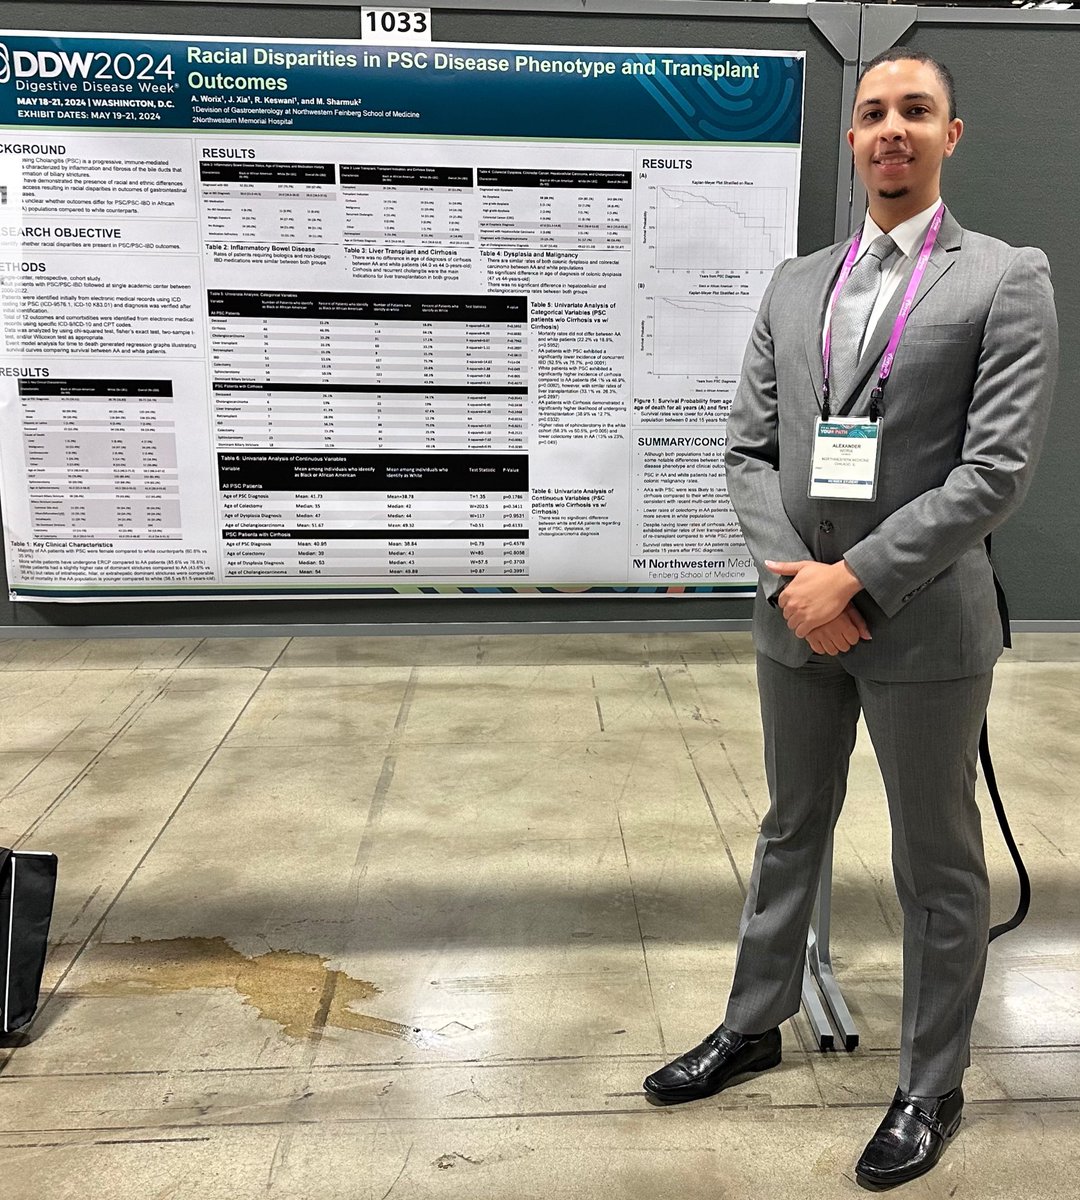 Very honored to share results about racial disparities in PSC @DDWMeeting 👉🏼 Similar mortality rates between both groups 👉🏼White patients are more likely to develop IBD, cirrhosis, and undergo liver transplantation 👉🏼Black patients are more likely to undergo re-transplantation